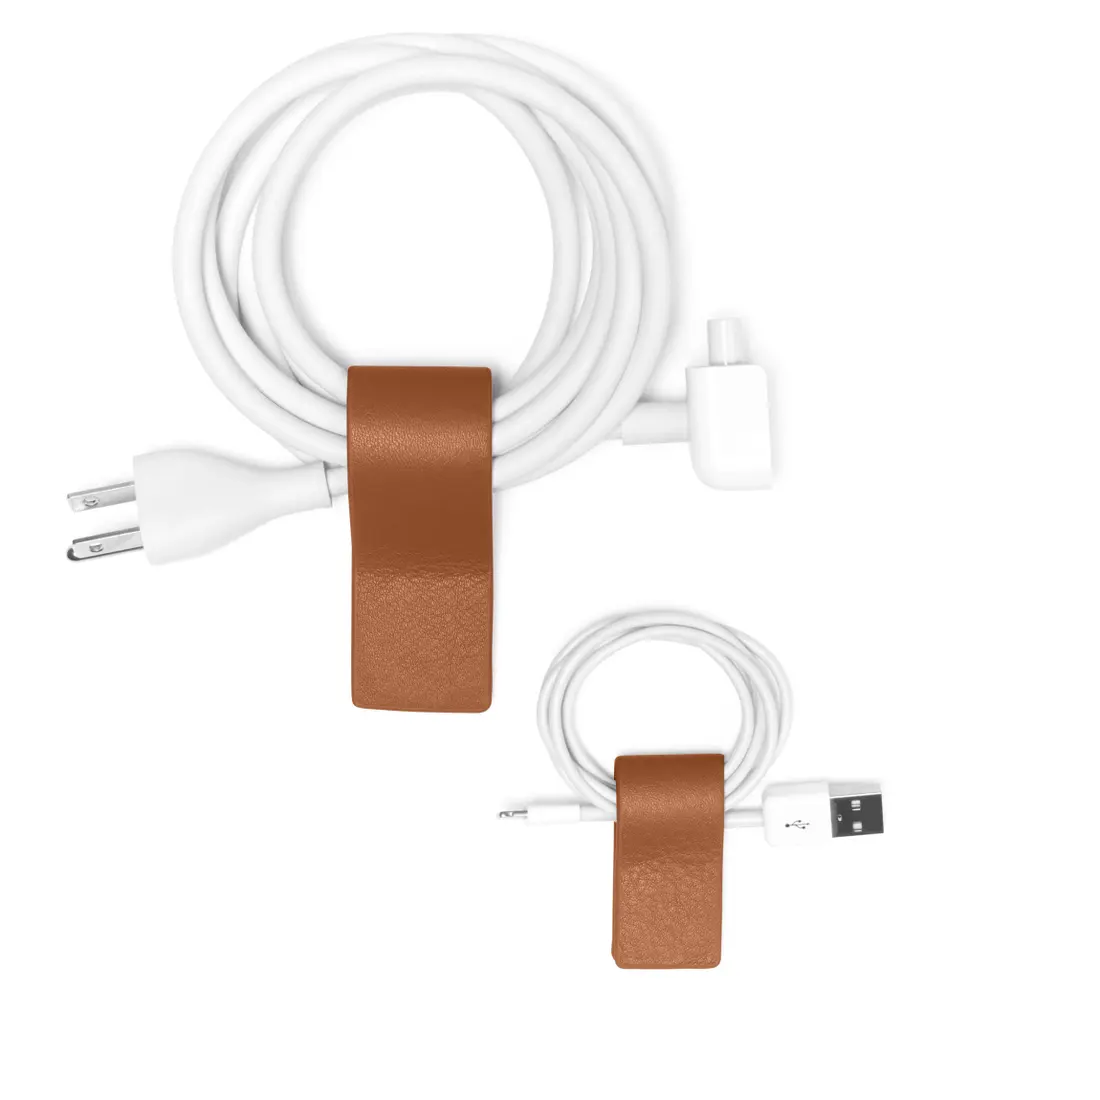 Two brown leather cord straps holding looped white cords against a white background.